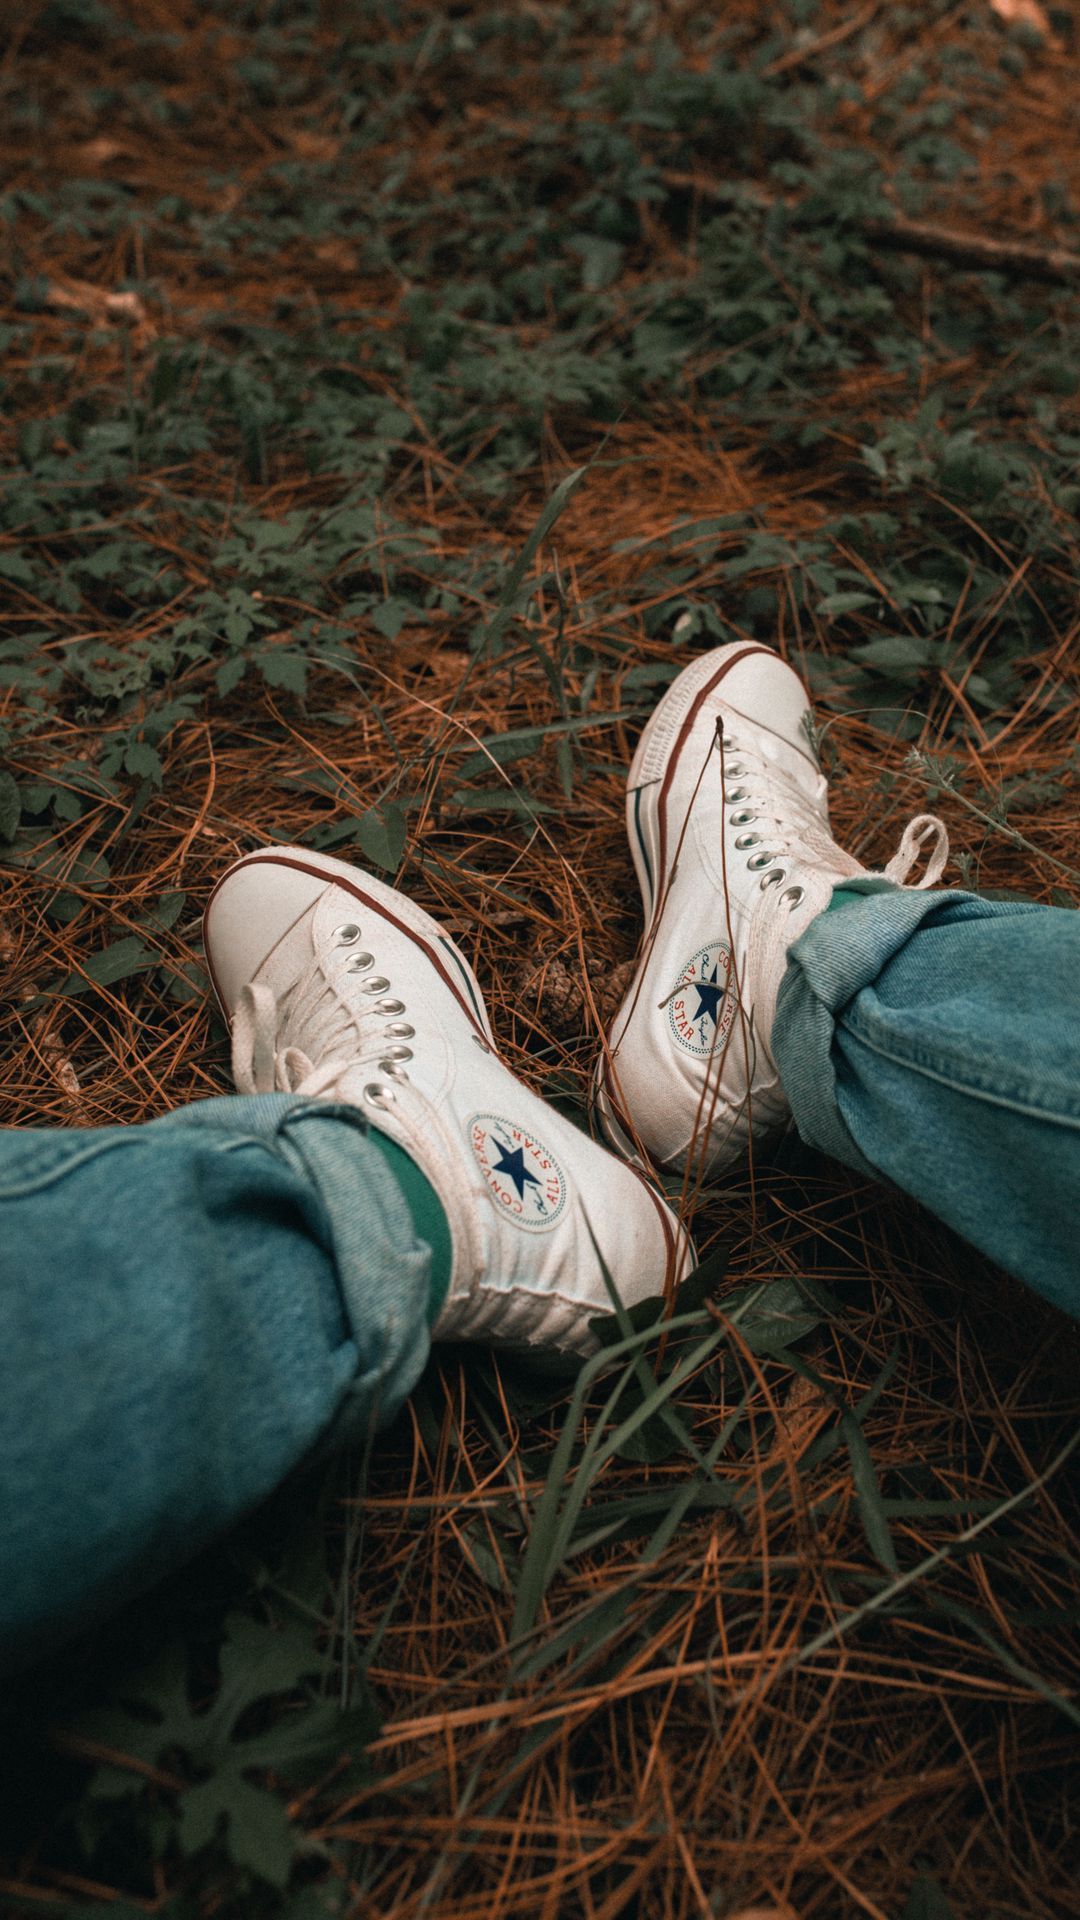 A person wearing jeans and white converse sneakers sitting on the grass - Converse